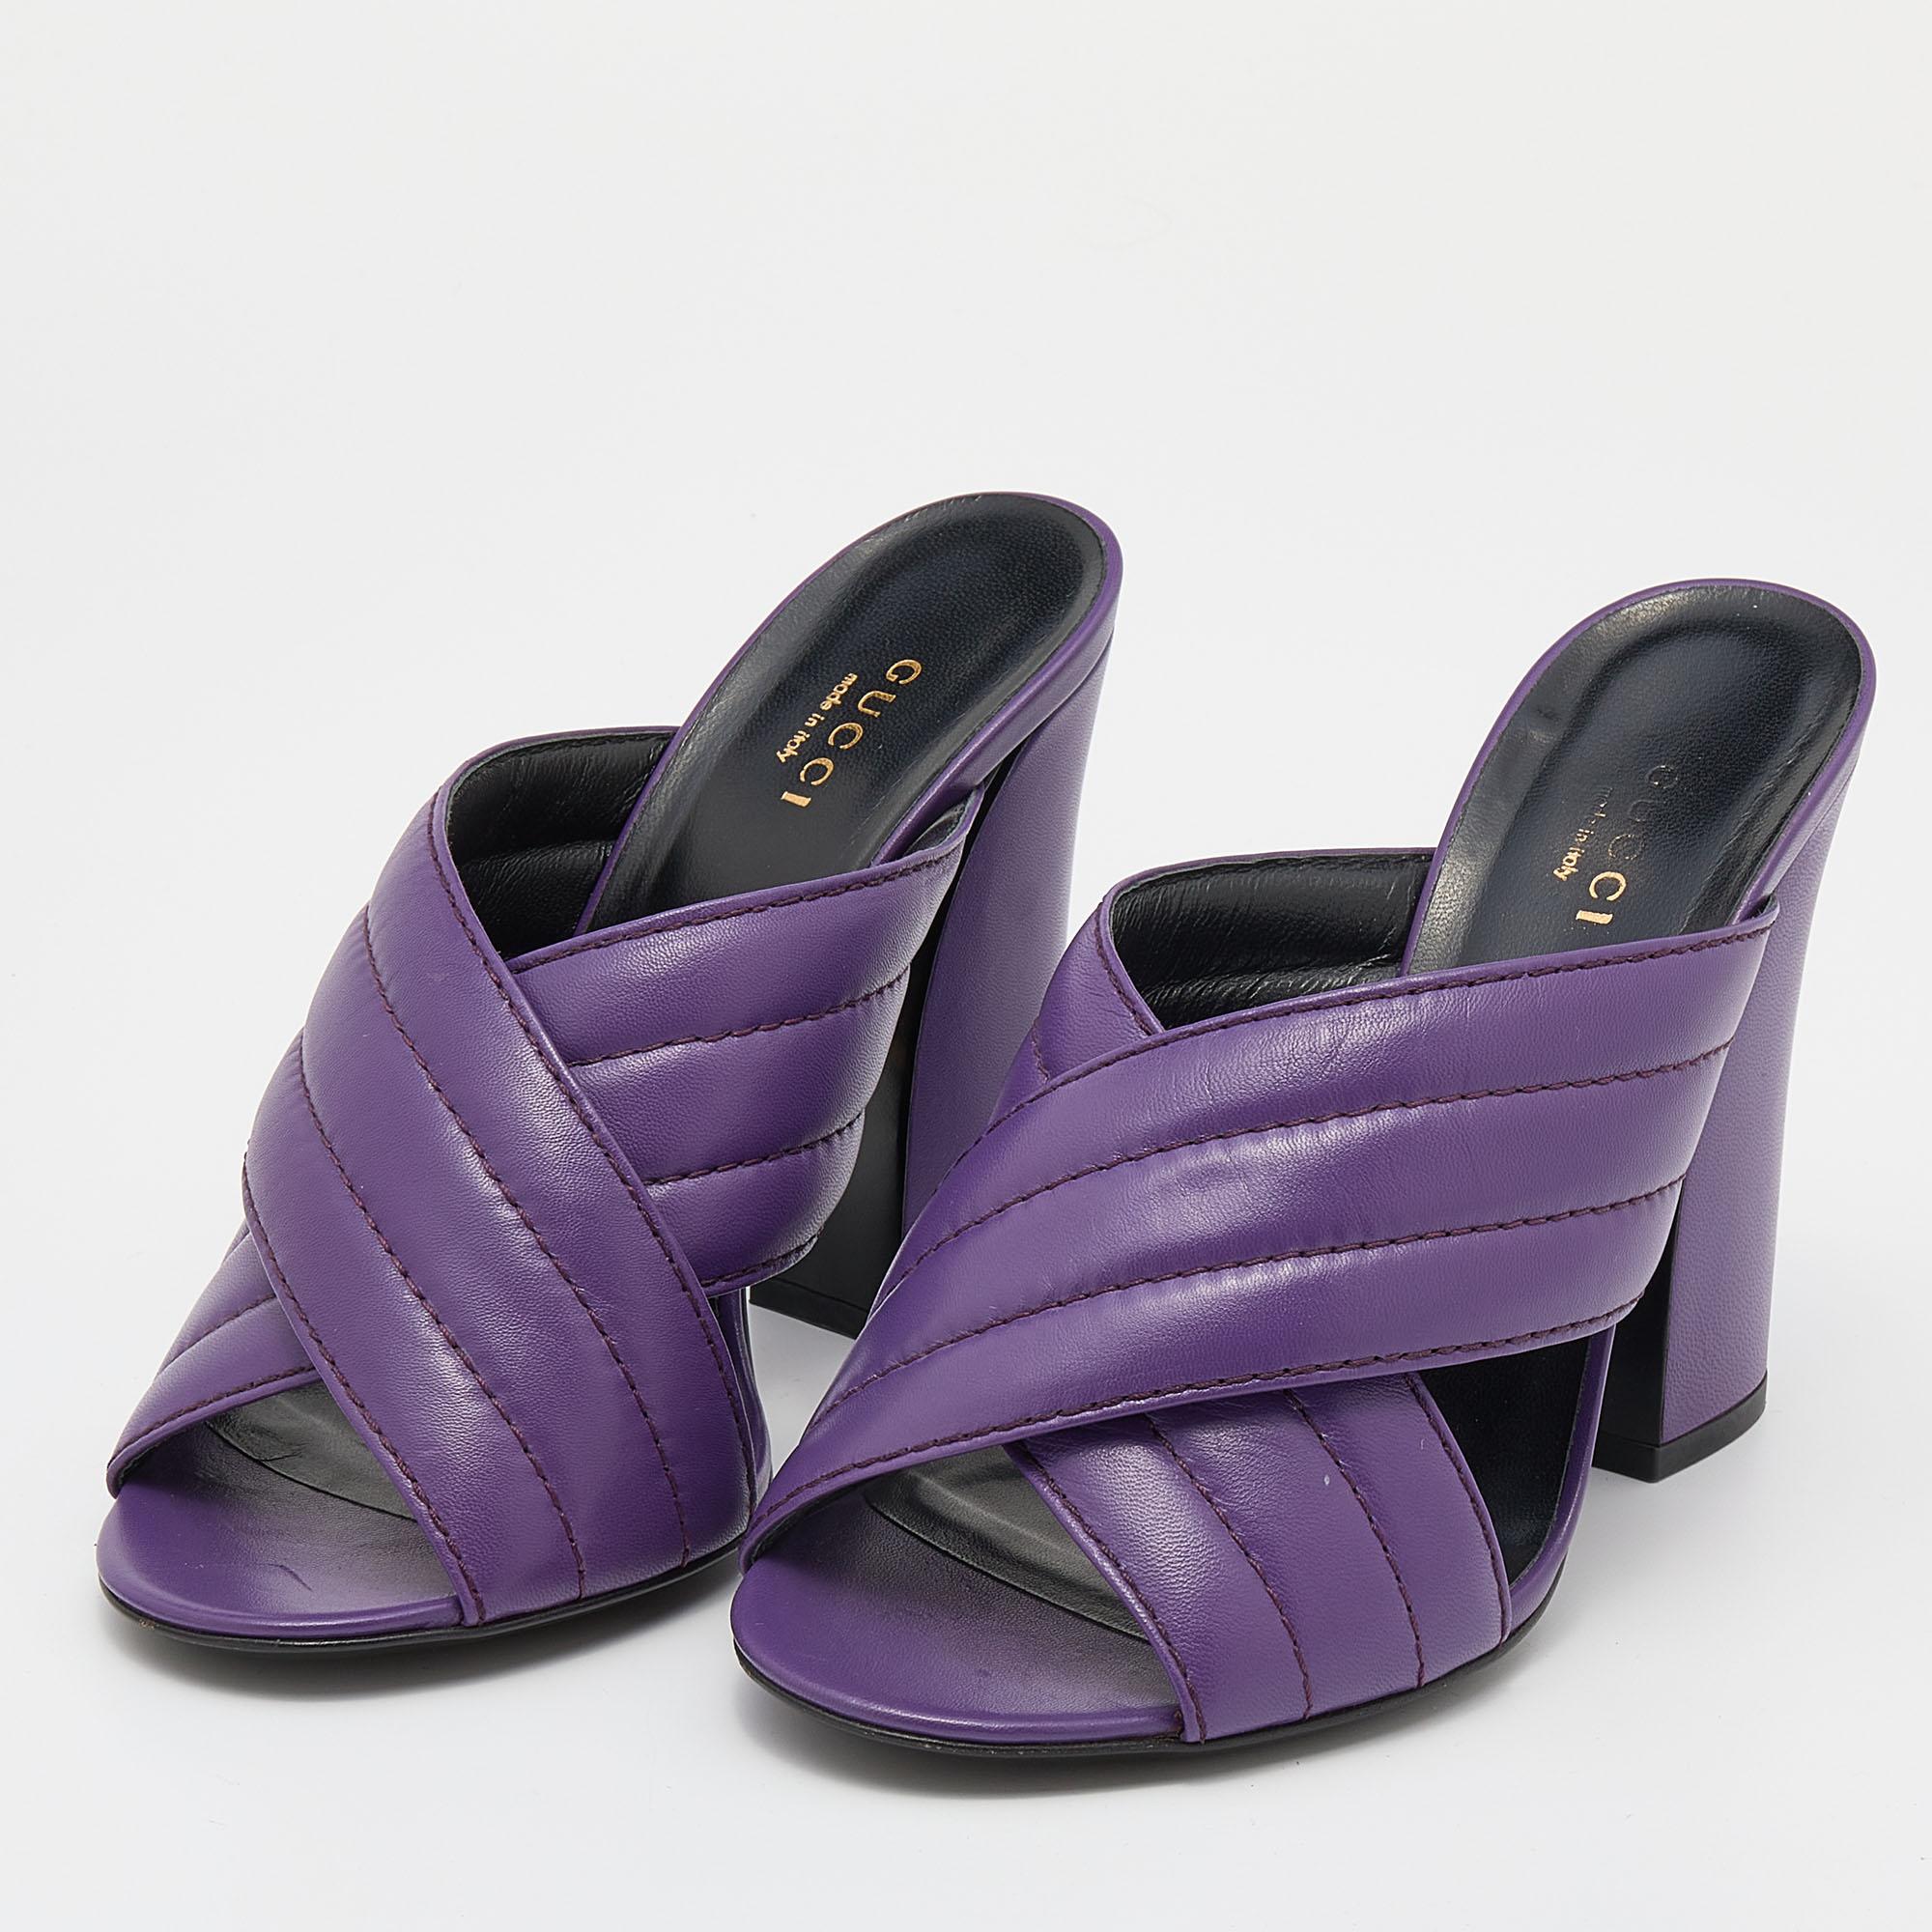 These chic sandals from Gucci will give your entire ensemble a luxe update. Crafted with quilted leather, this pair features open toes, a wide crisscross strap on the vamps, and 12cm heels. These fine purple shoes will offer both elegance and